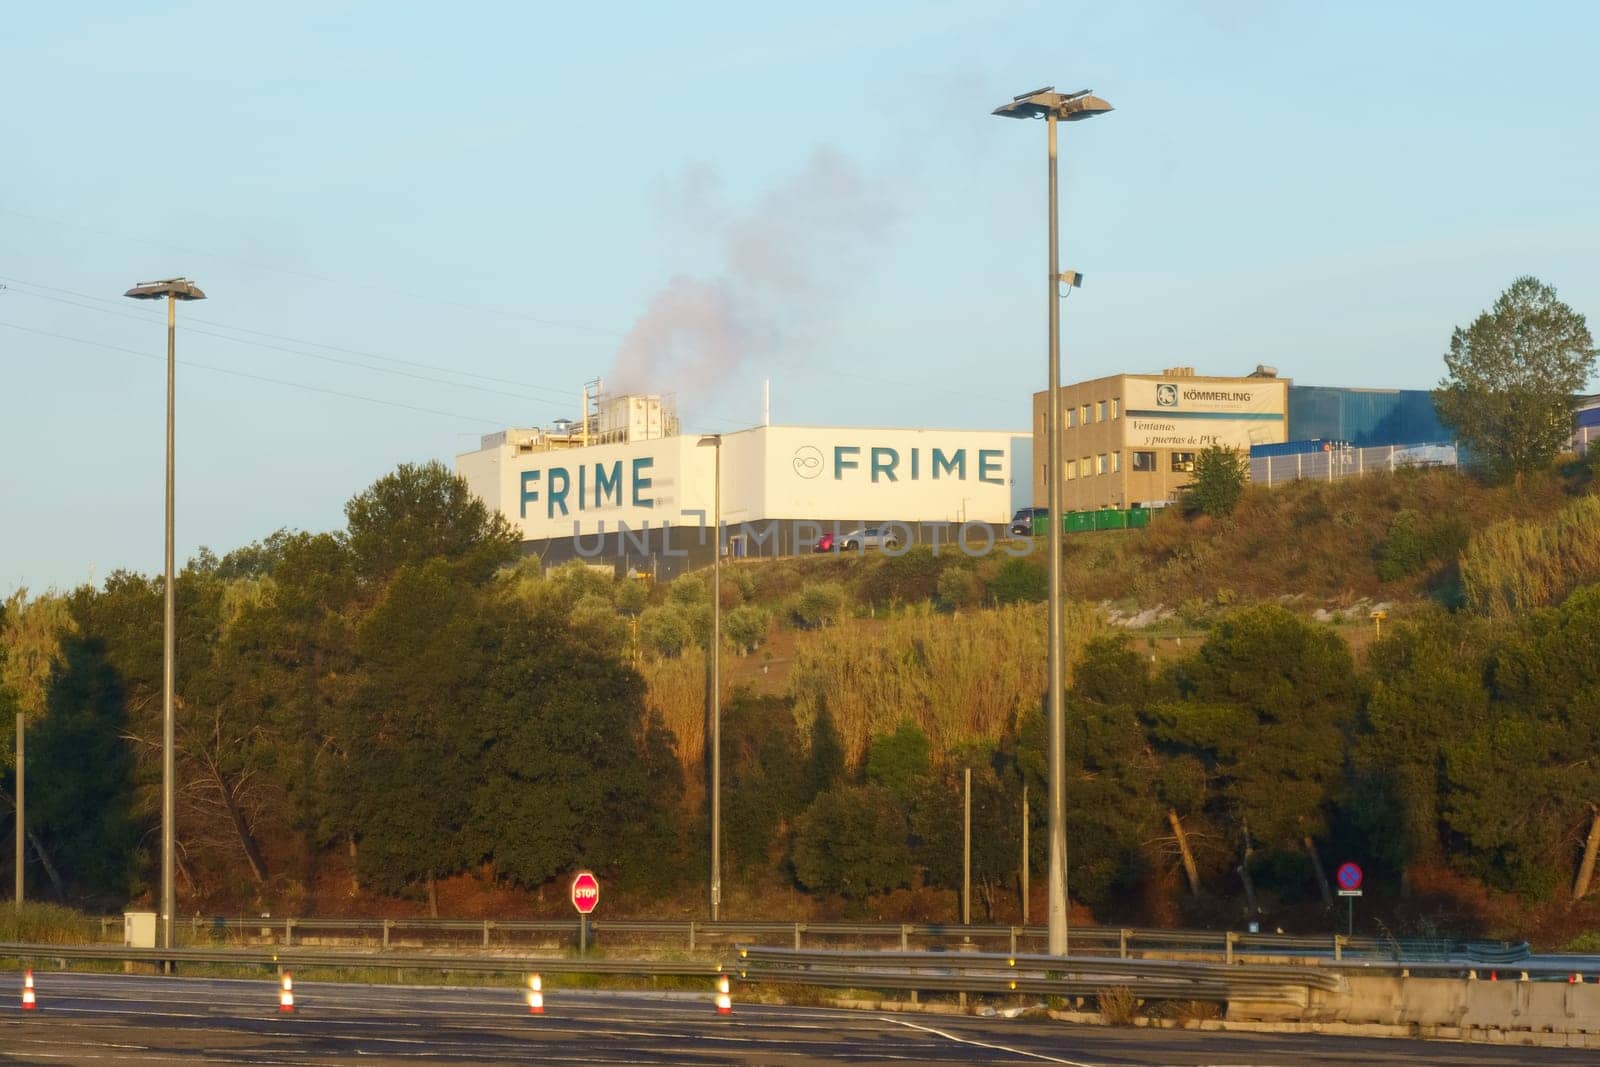 Evening Smoke Rising From FRIME Factory by Highway by Sd28DimoN_1976